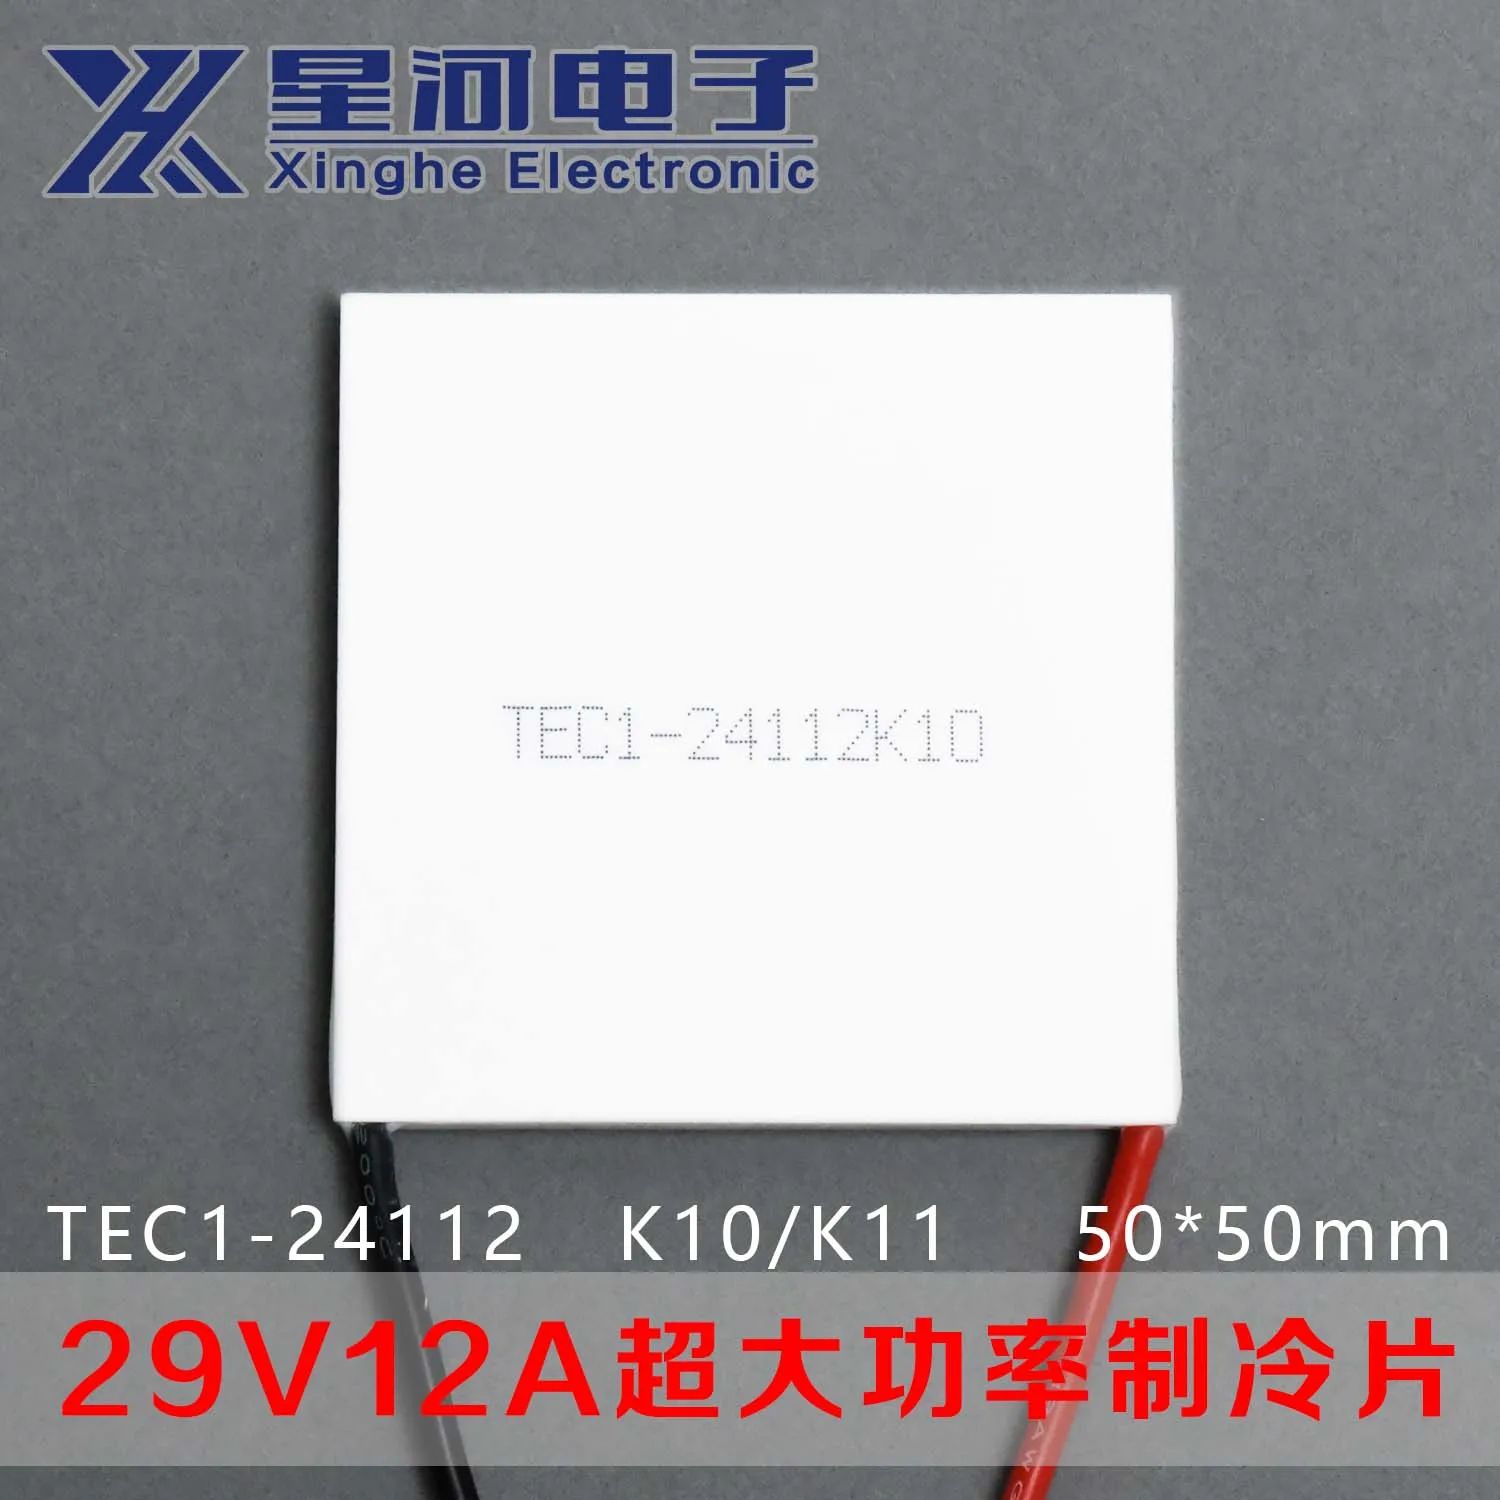 

Tec1-24112 Industrial-grade high-power semiconducting Peltier cooler strong refrigeration fast cooling 50*50mm